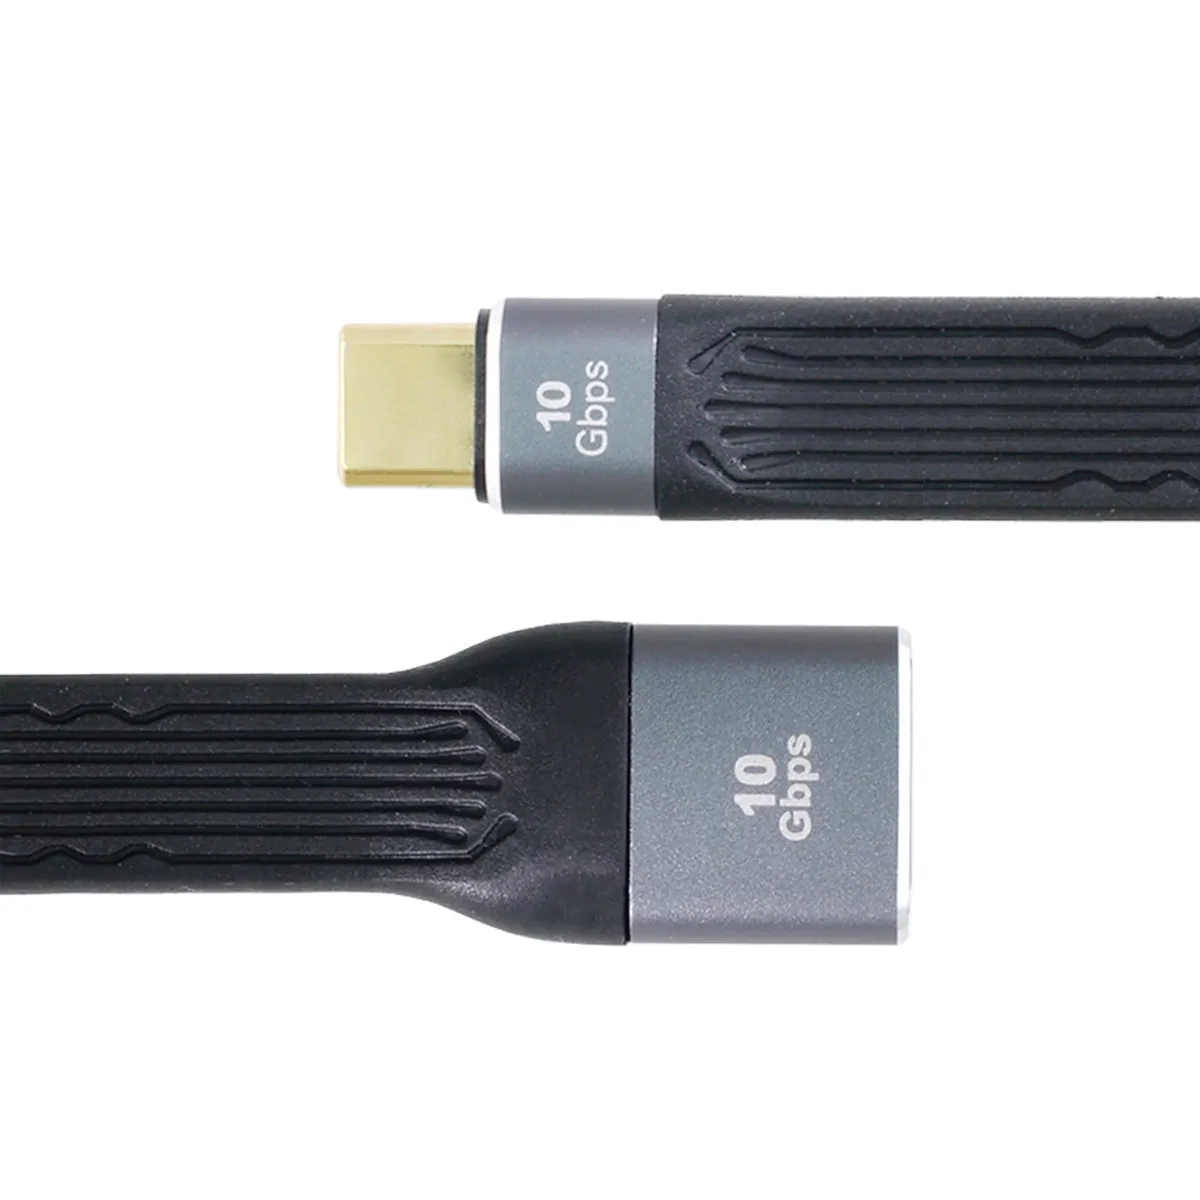 

Jimier USB3.0 Type A Female OTG to USB 3.1 Type C Male Host Flat Slim FPC Data Cable for Laptop & Phone